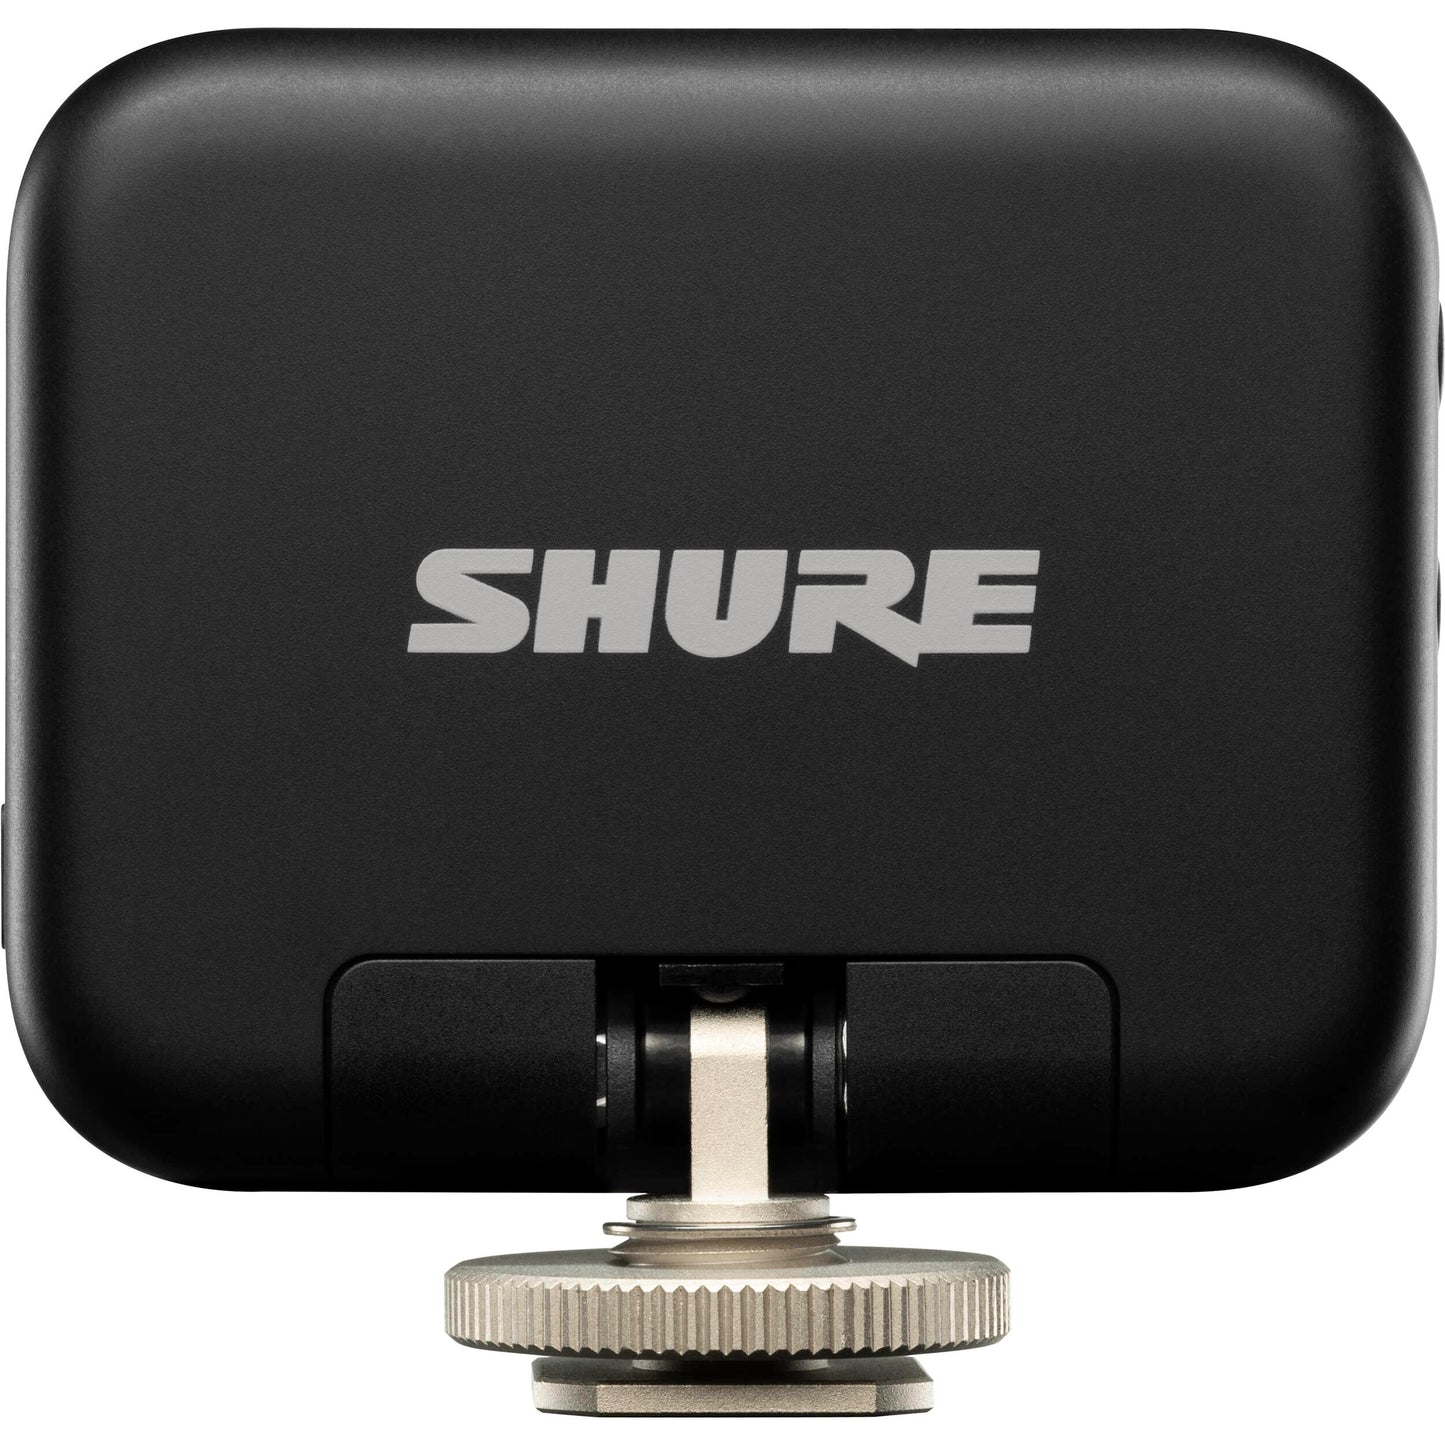 Shure MoveMic Wireless Microphone Receiver for Cameras & Mobile Devices